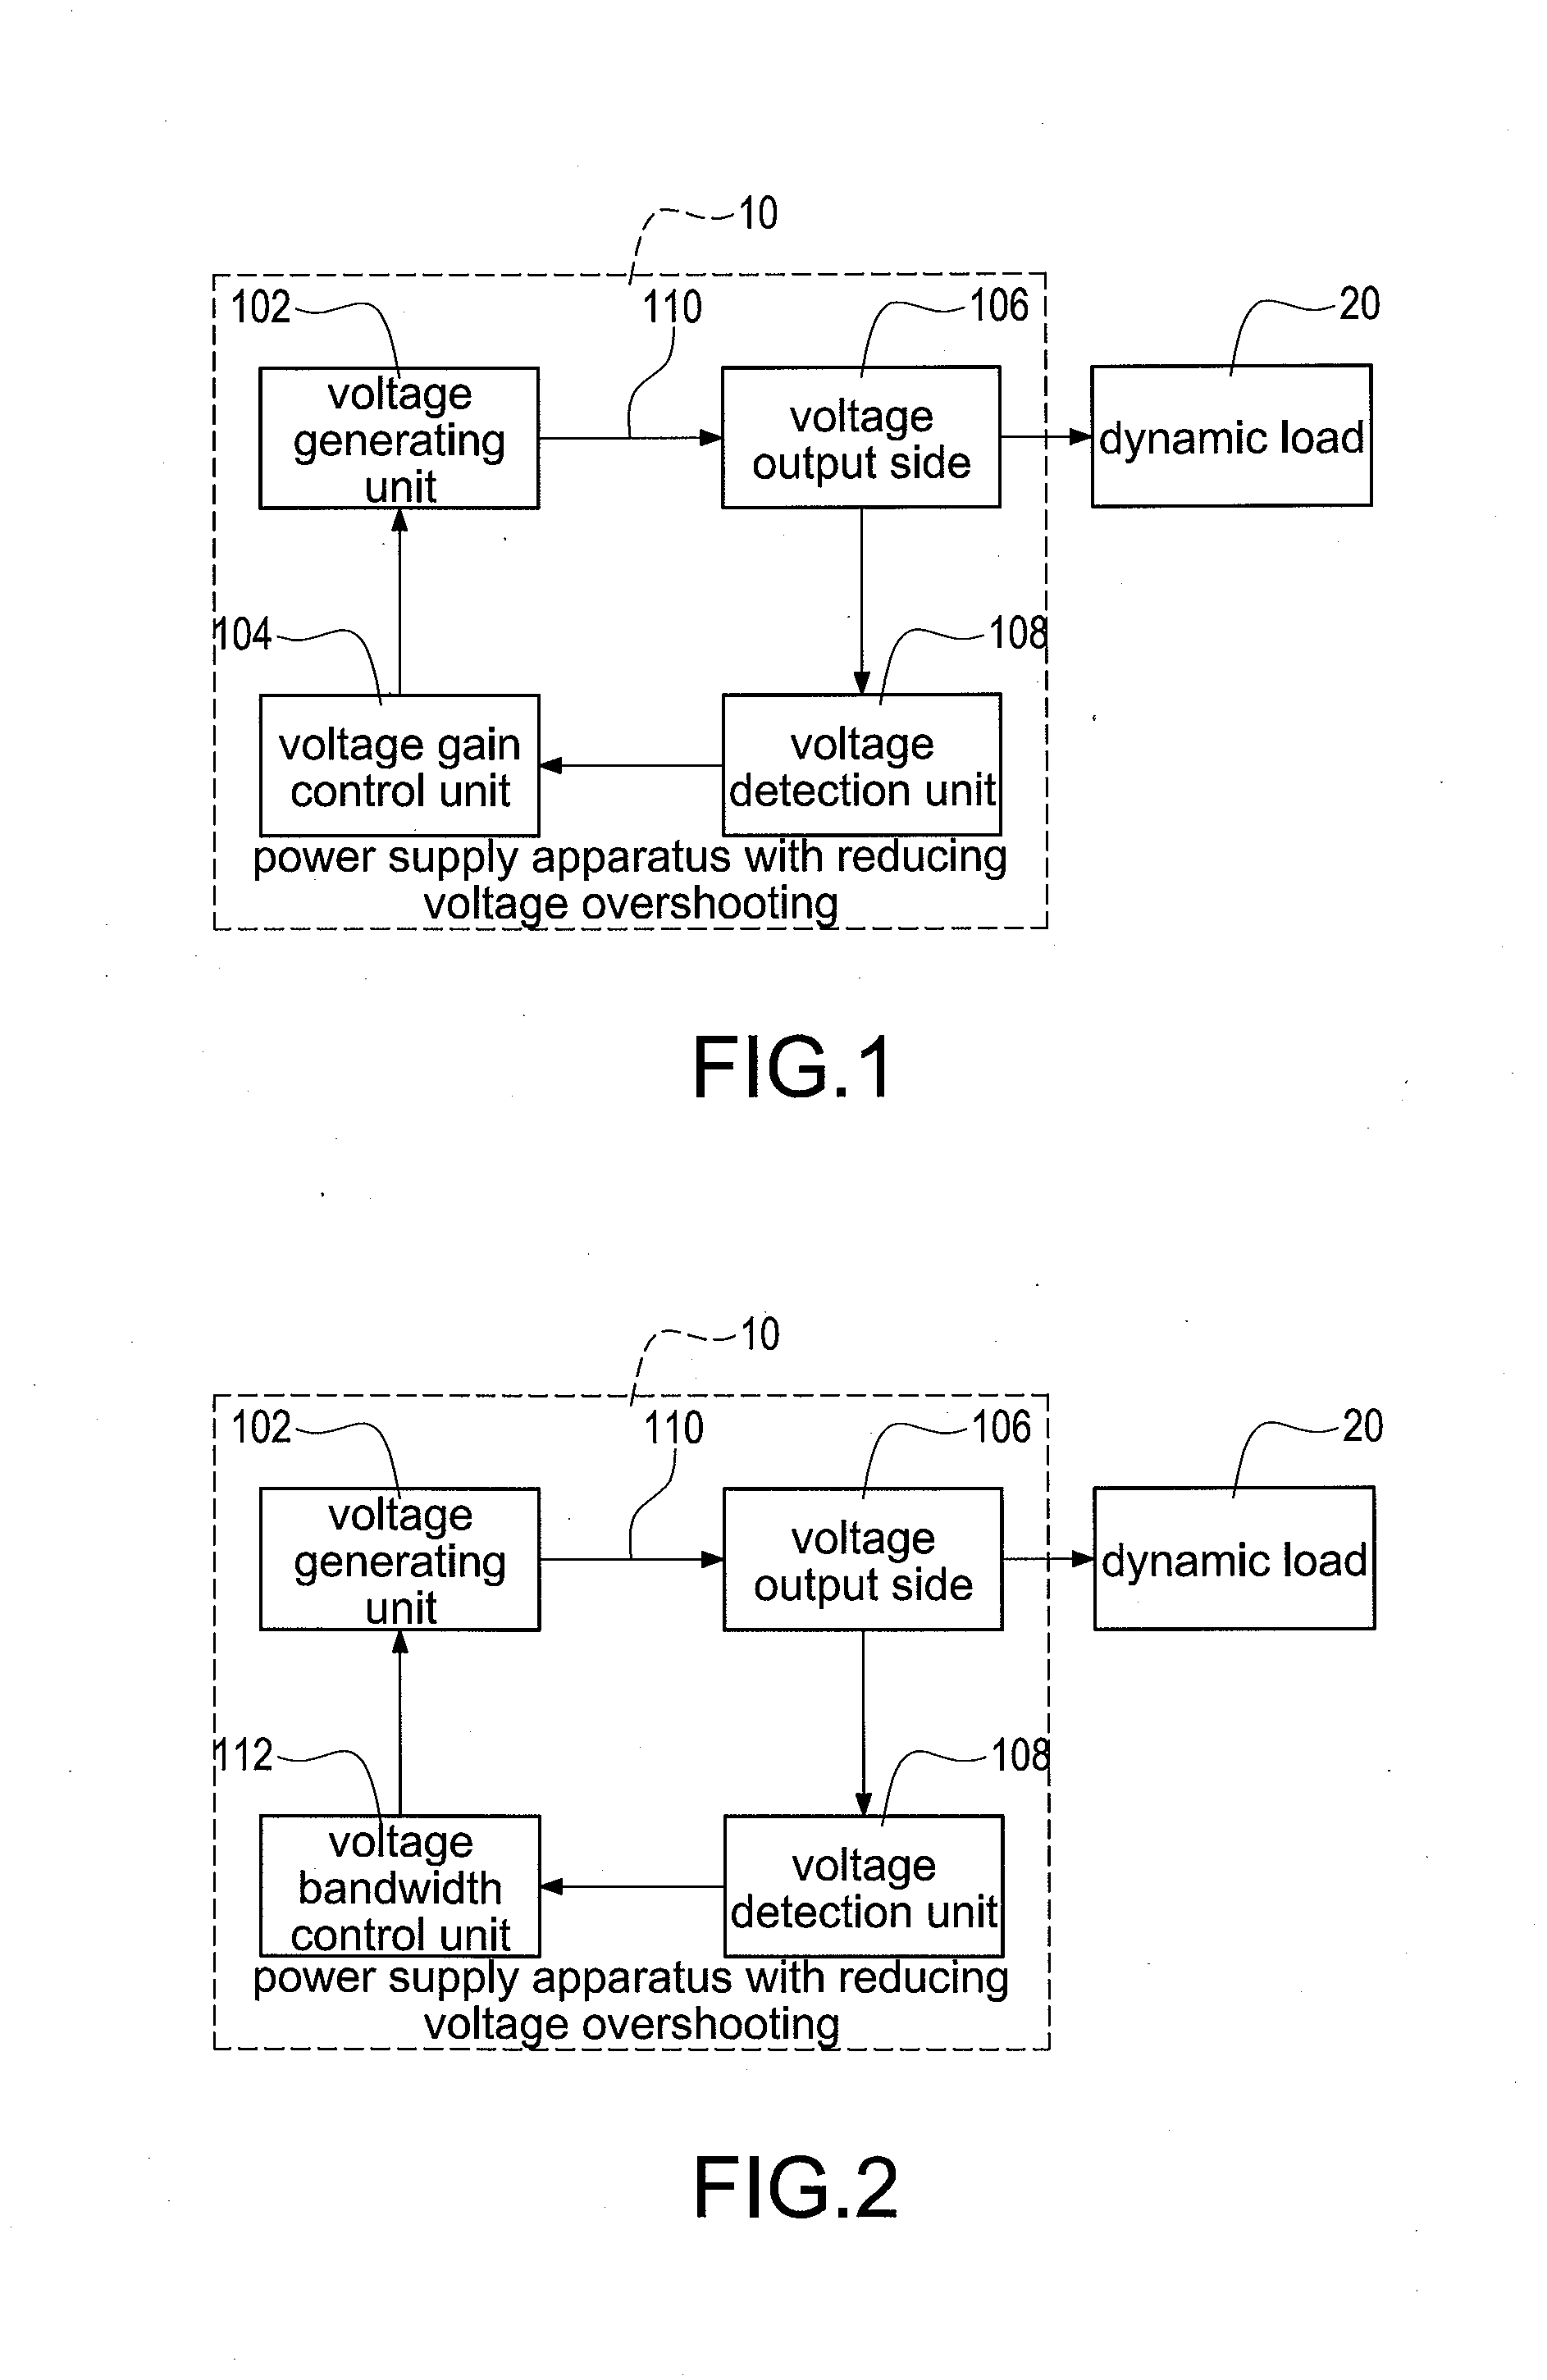 Power supply apparatus with reducing voltage overshooting